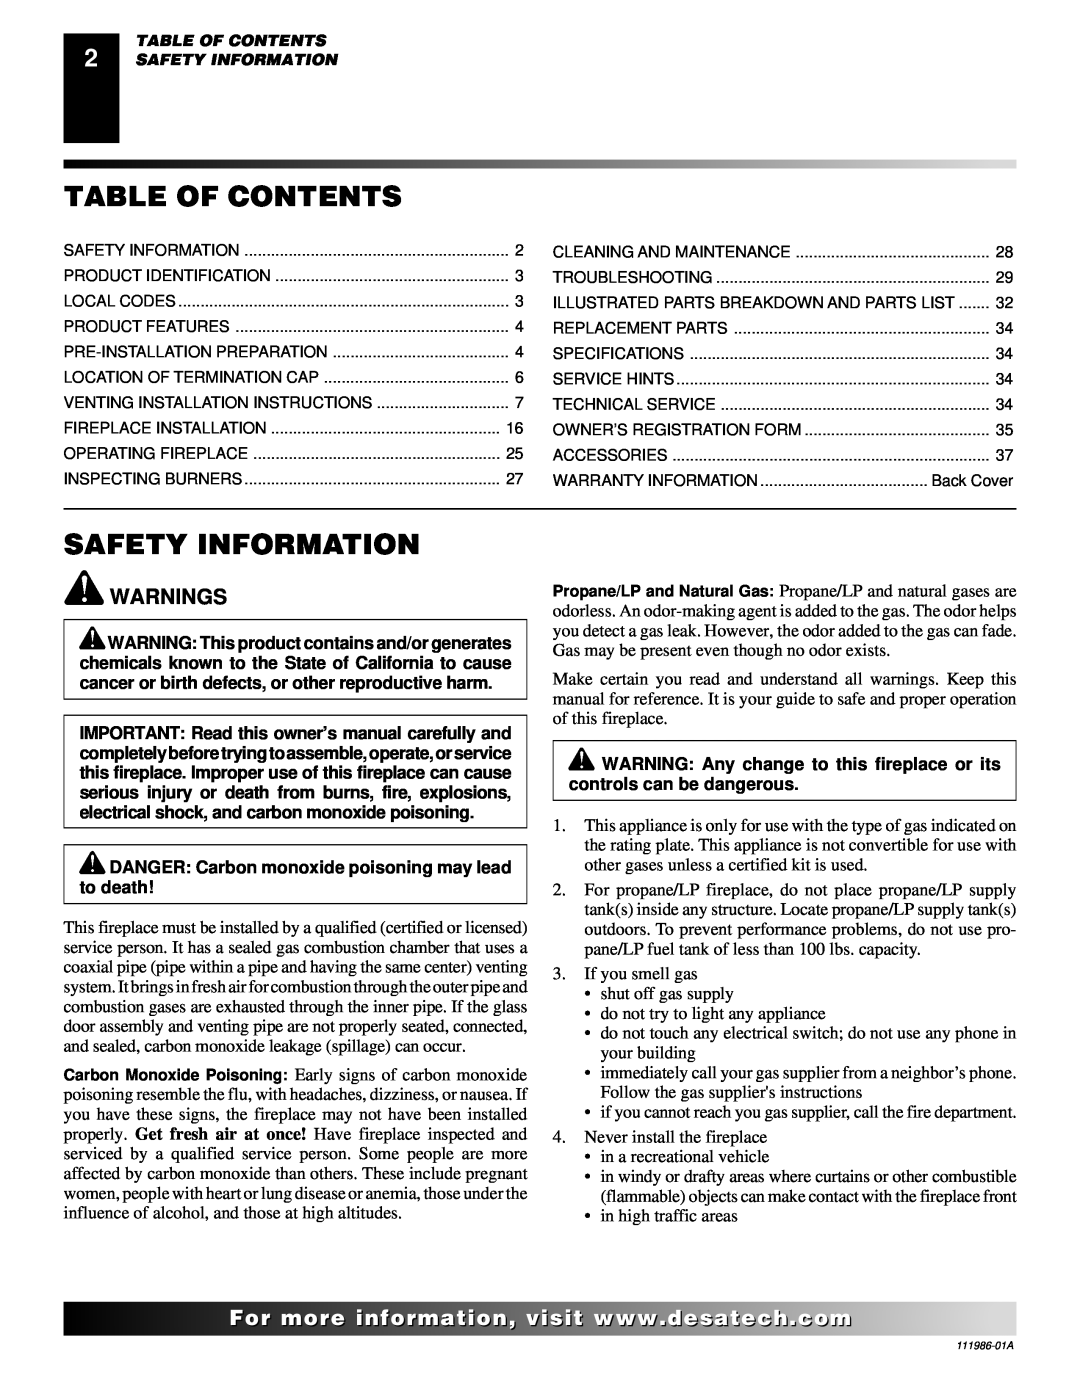 Desa T32P Table Of Contents, Safety Information, Warnings, For..com, DANGER Carbon monoxide poisoning may lead to death 